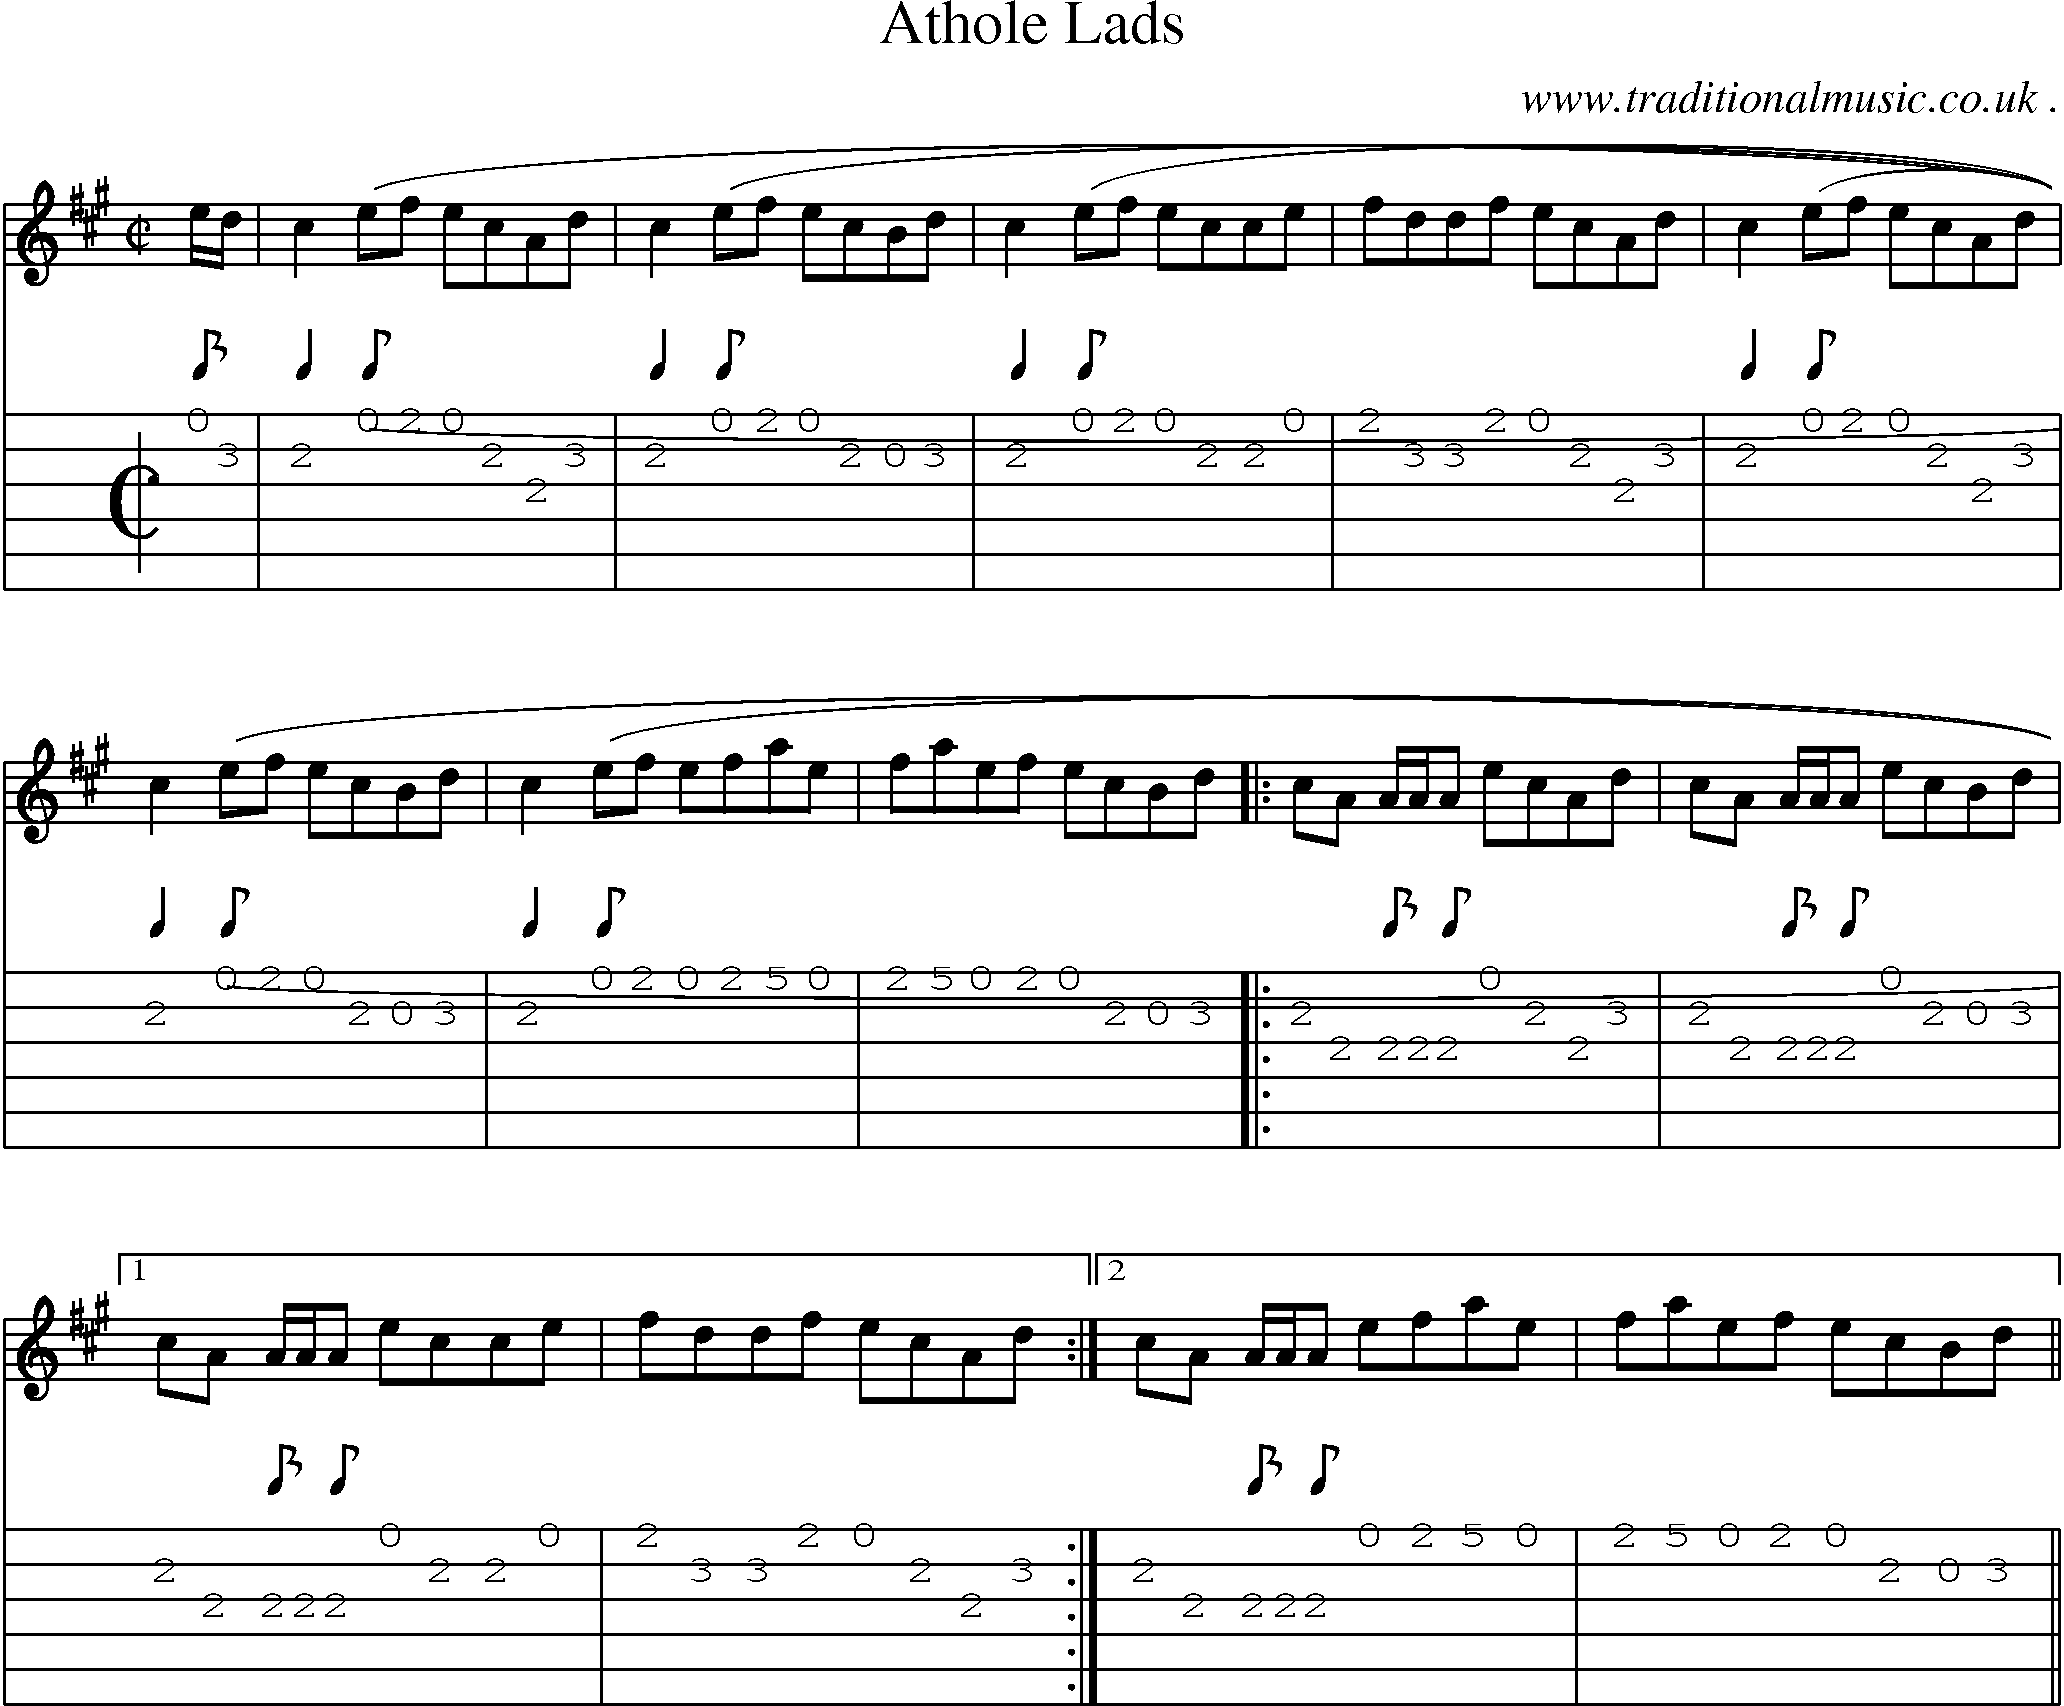 Sheet-music  score, Chords and Guitar Tabs for Athole Lads